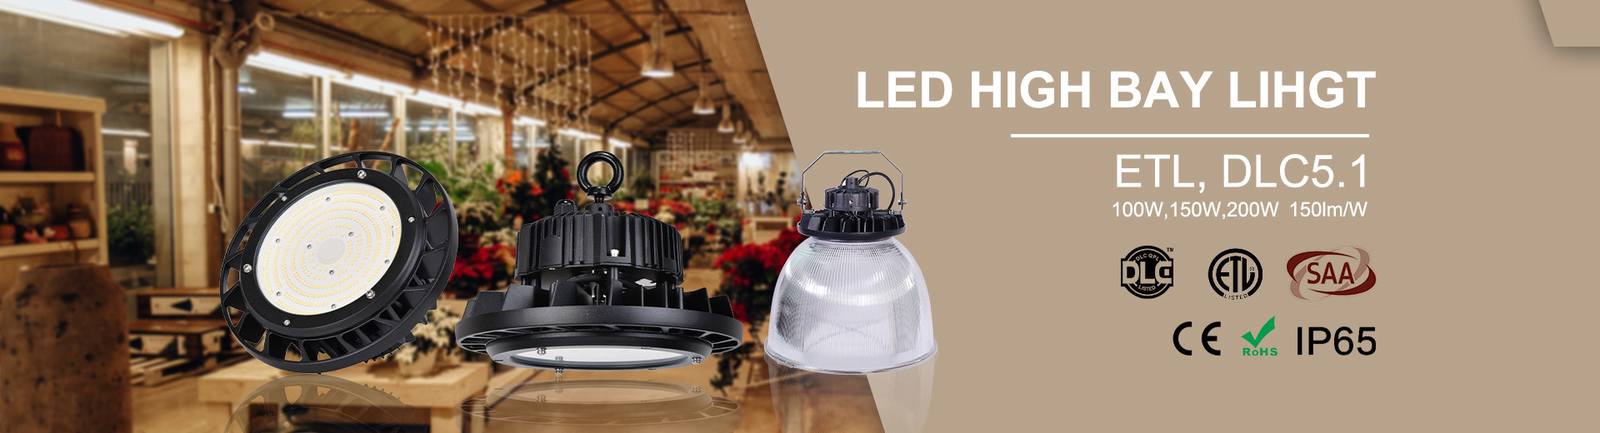 Eclairage LED High Bay